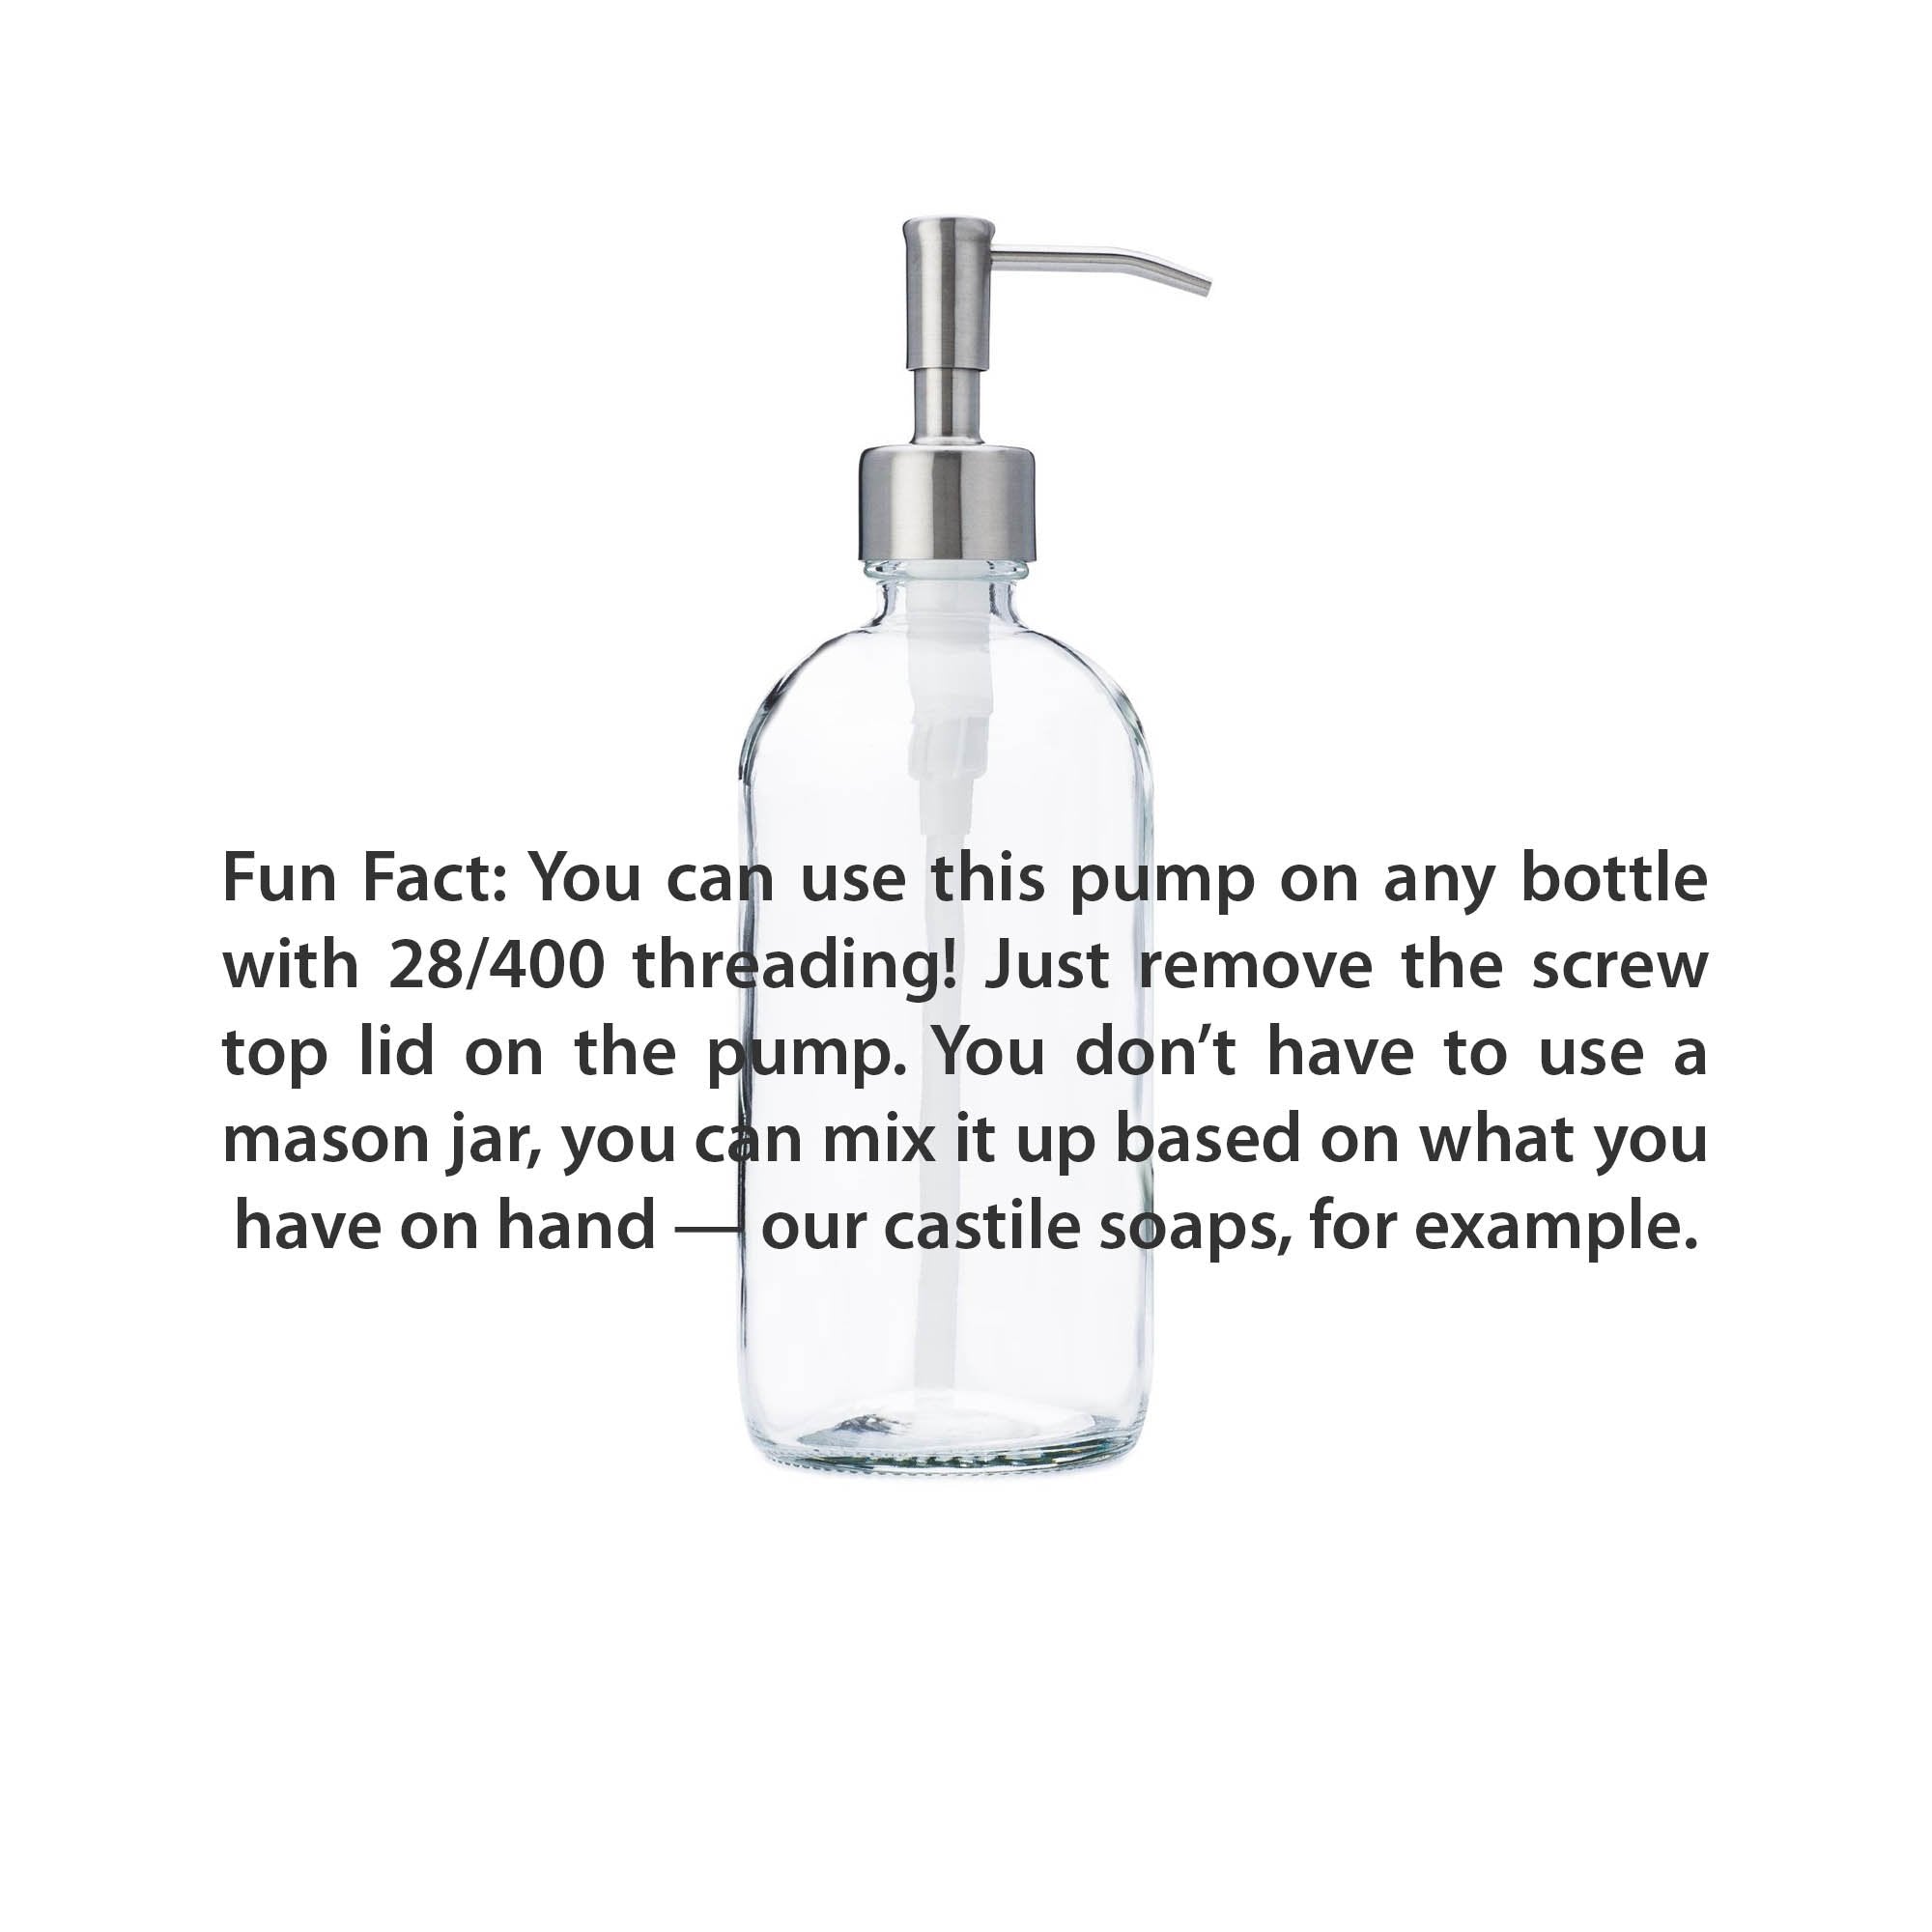 pump top with fun fact text. "you can use this pump on any bottle with 28/400 threading! just remove the screw top lid on the pump. You don't have to us a mason jar, you can mix it up based on what you have on hand- our castile soaps, for example.